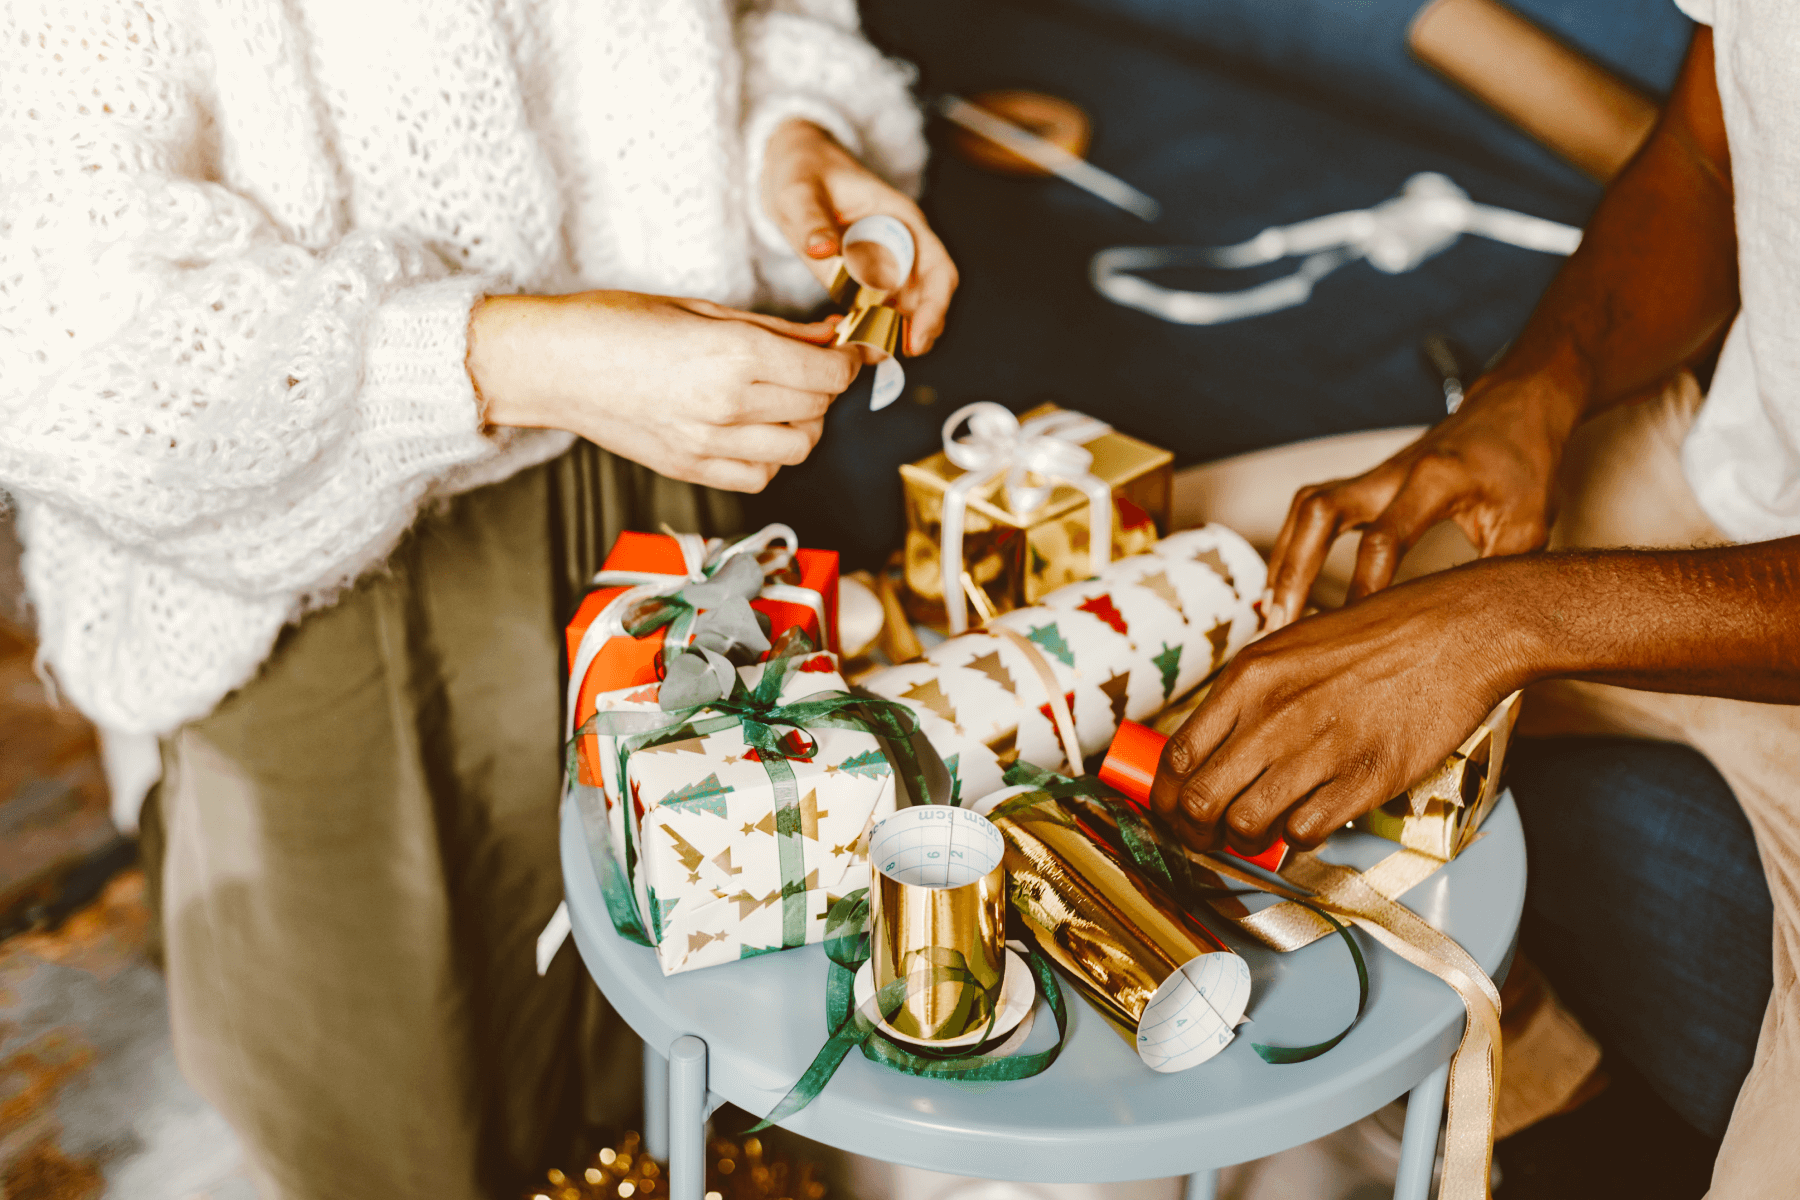 26 Fun Gift Exchange Games Suitable For Any Party